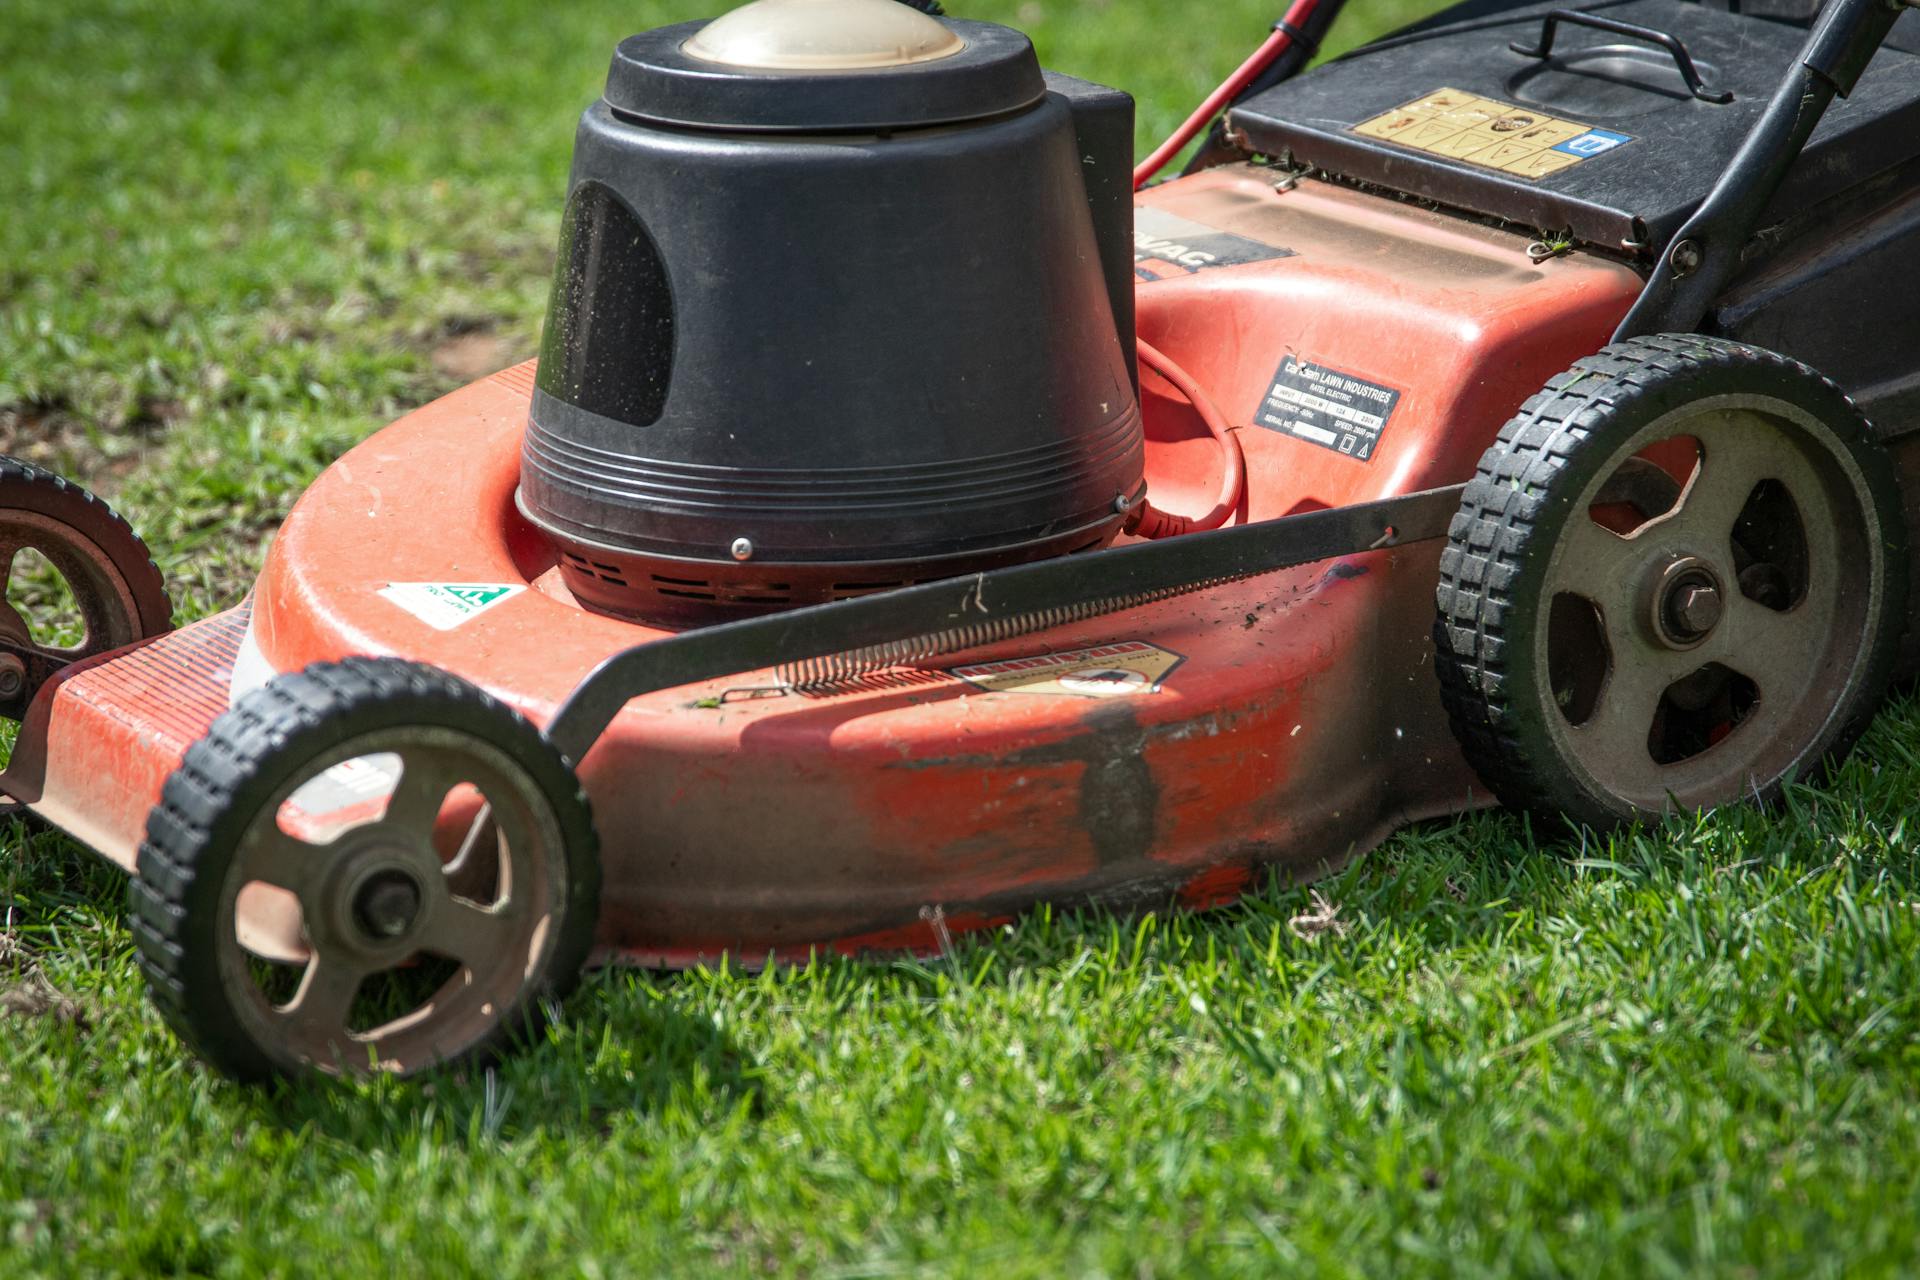 A red lawn mower | Source: Pexels